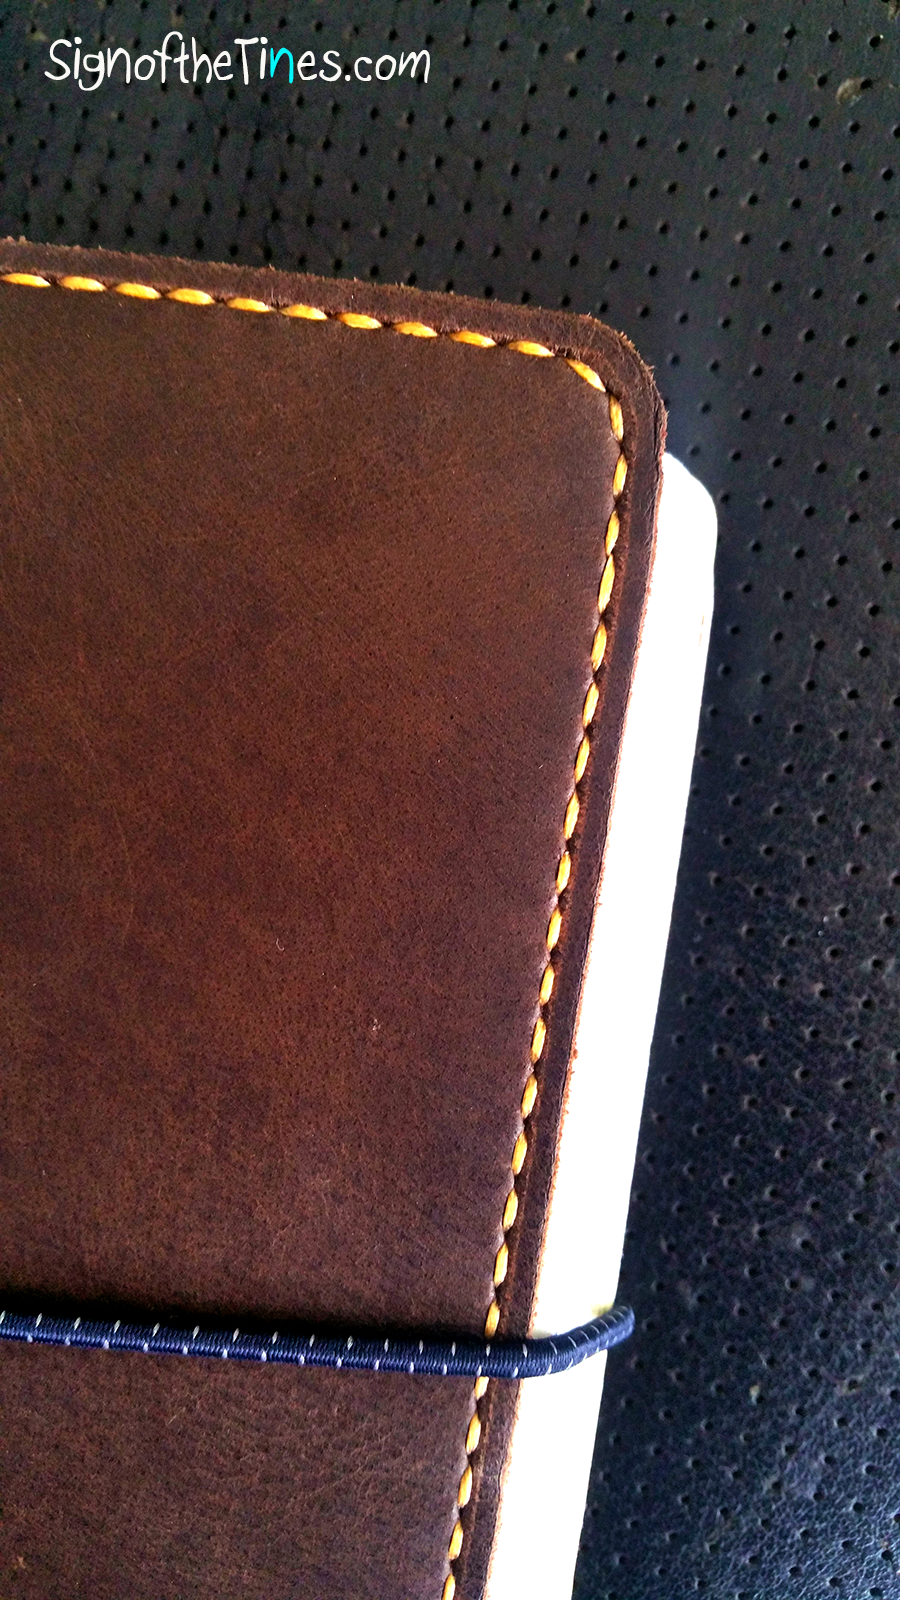 A5 Travelers Notebook by Sunday LEather Craft